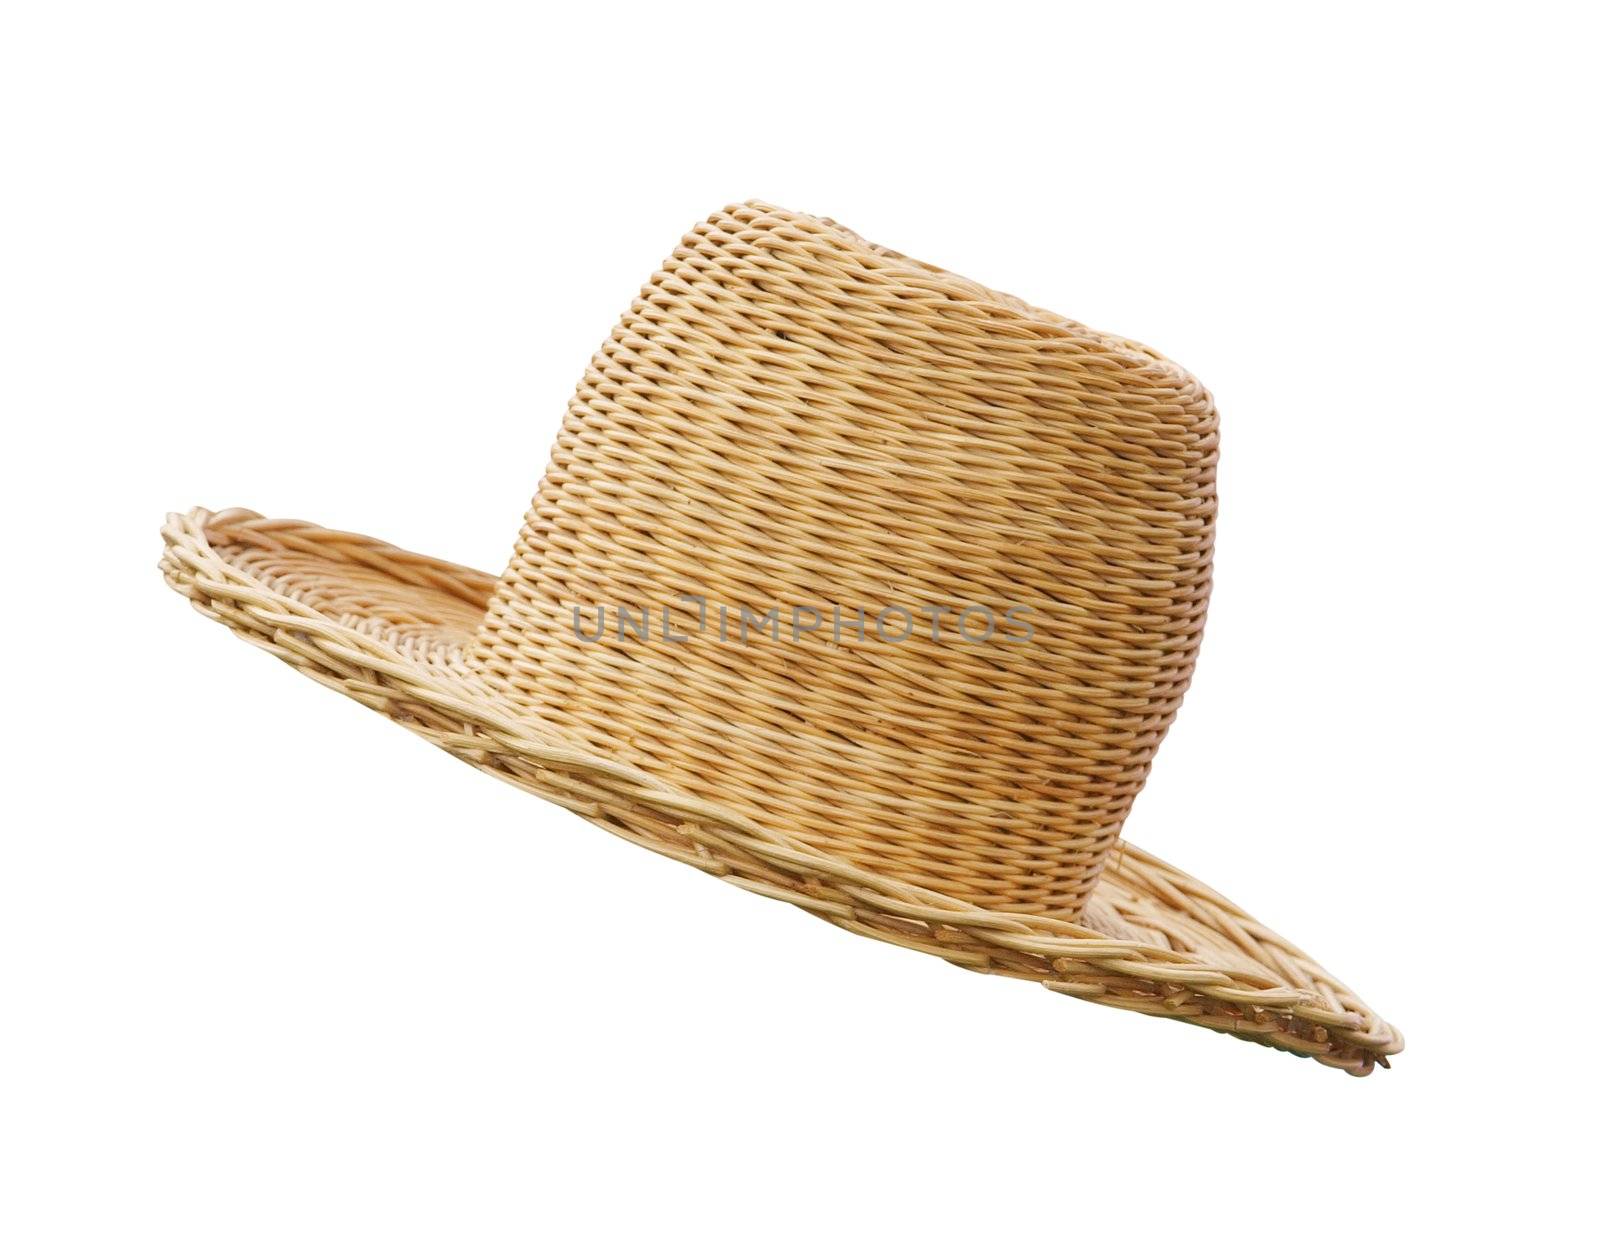 Cane Hat isolated with clipping path